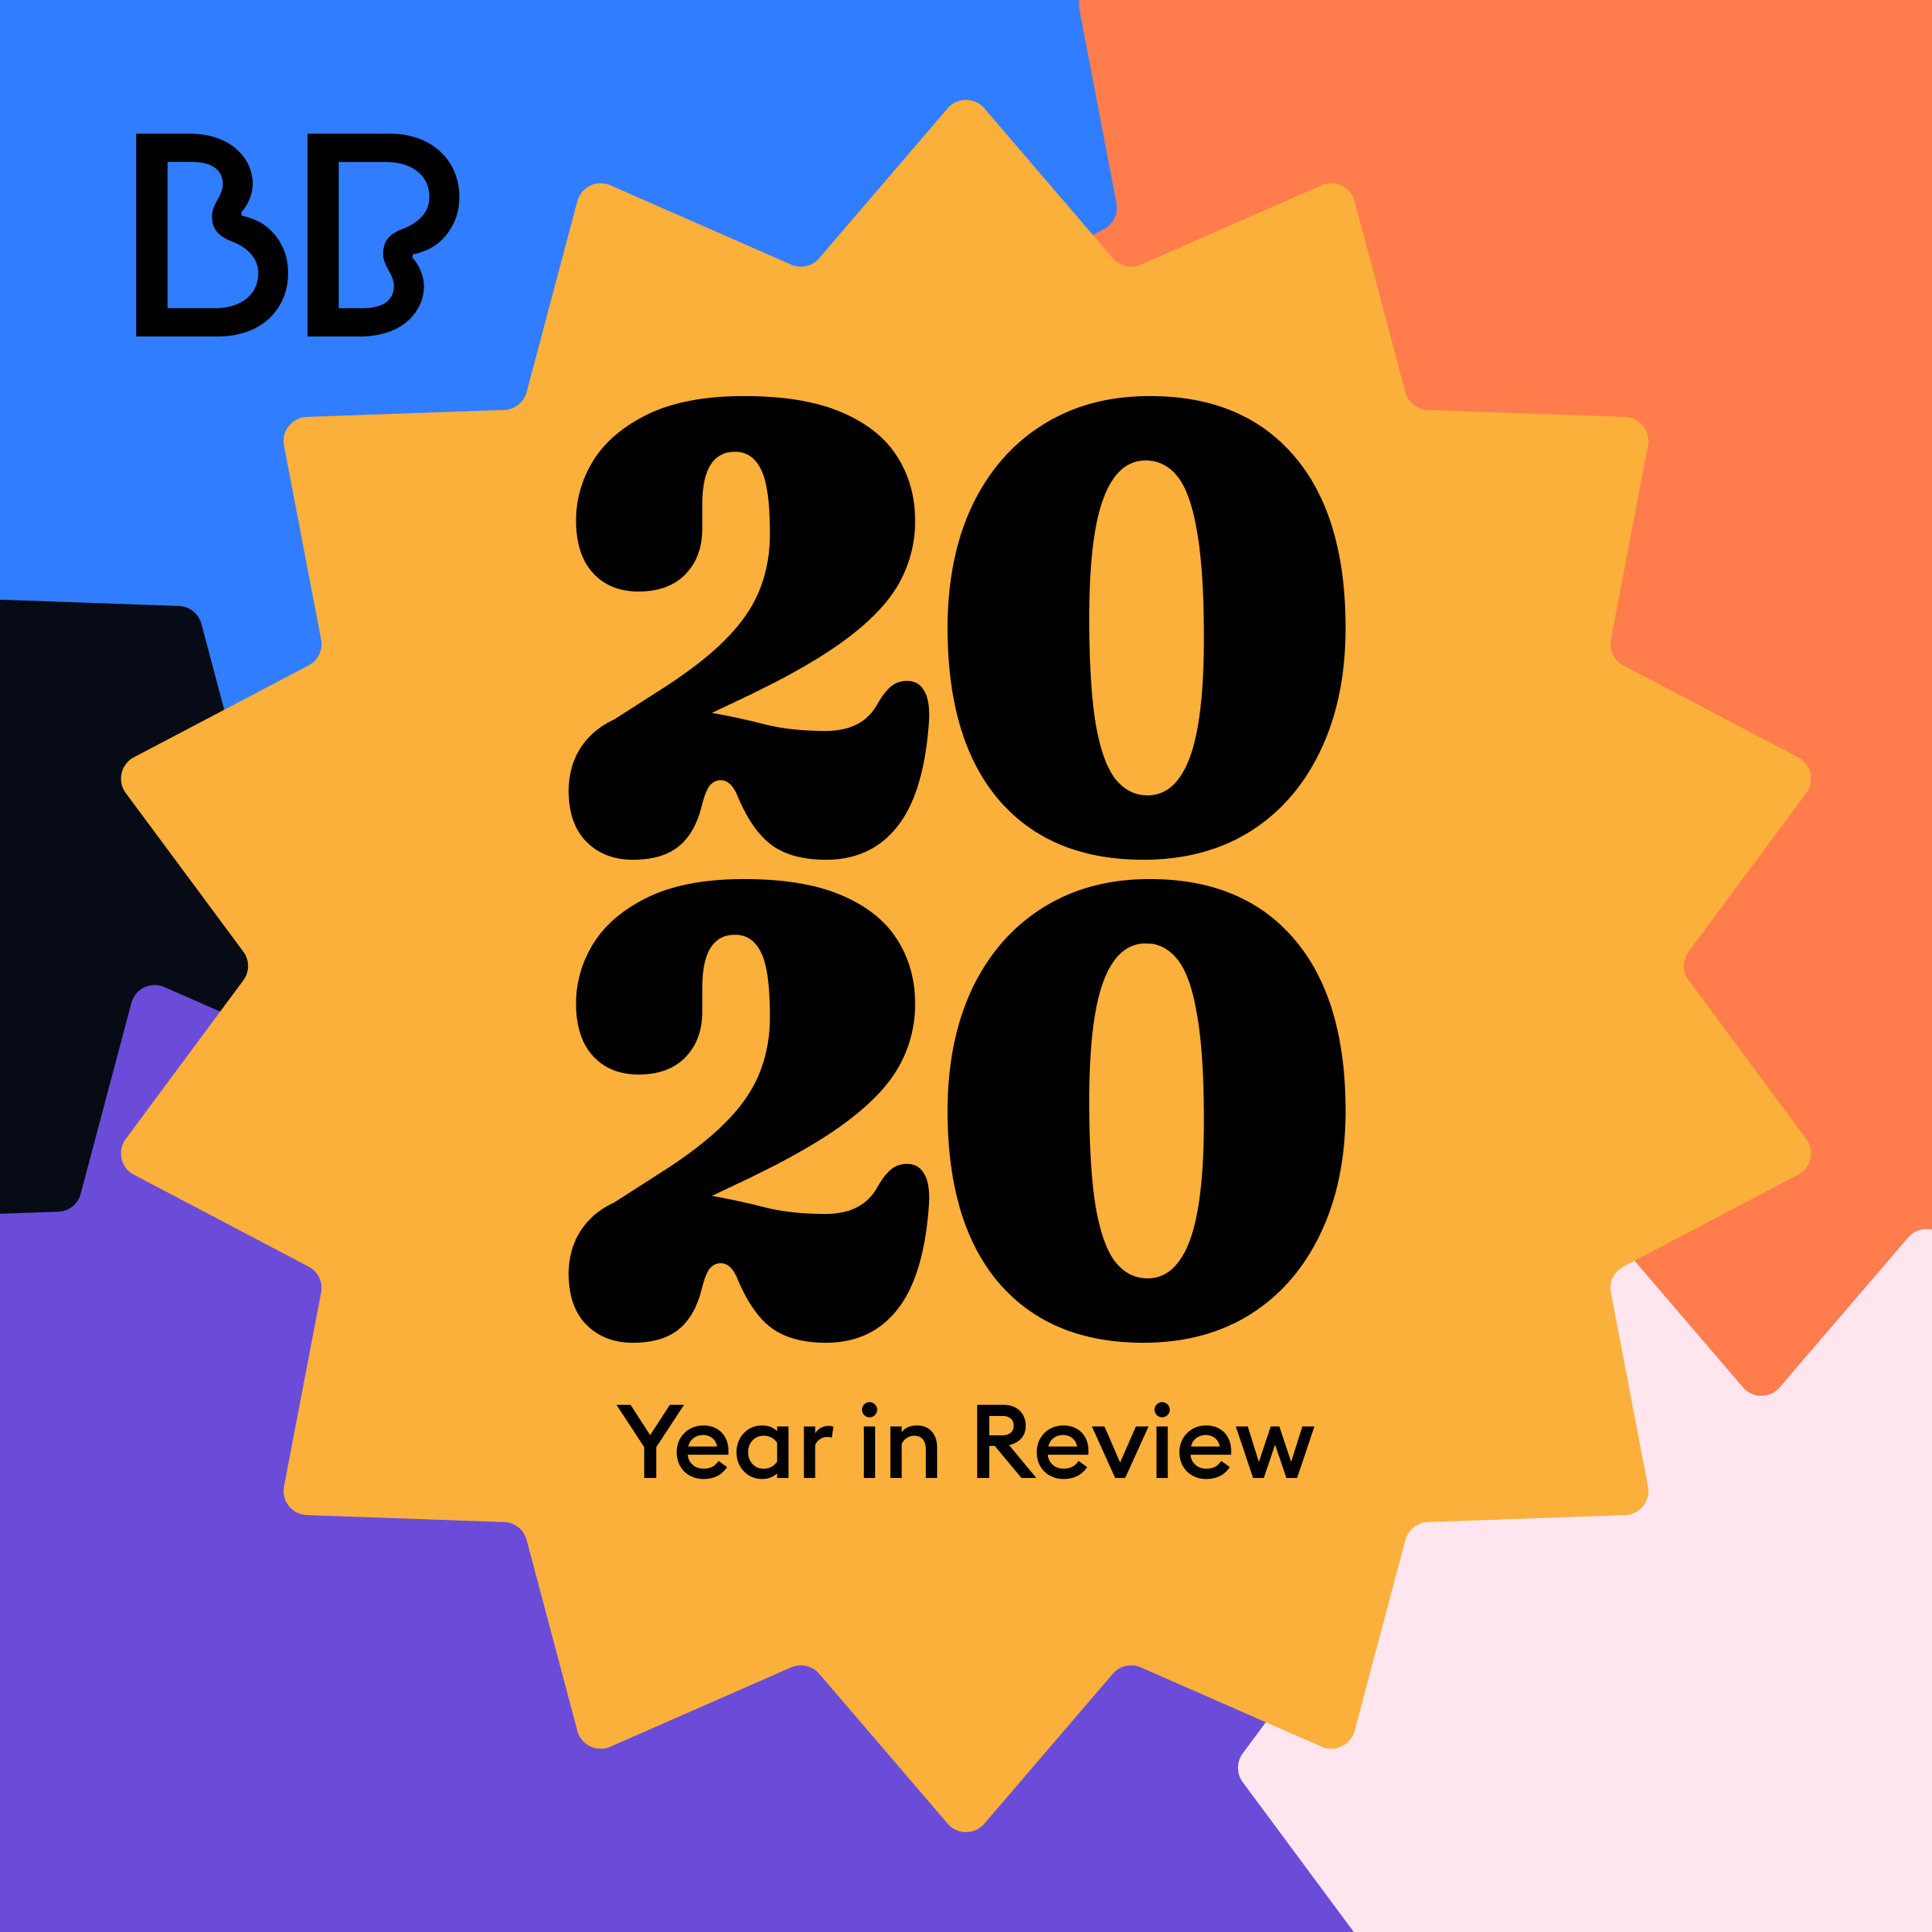 Better Product 2020 Year in Review